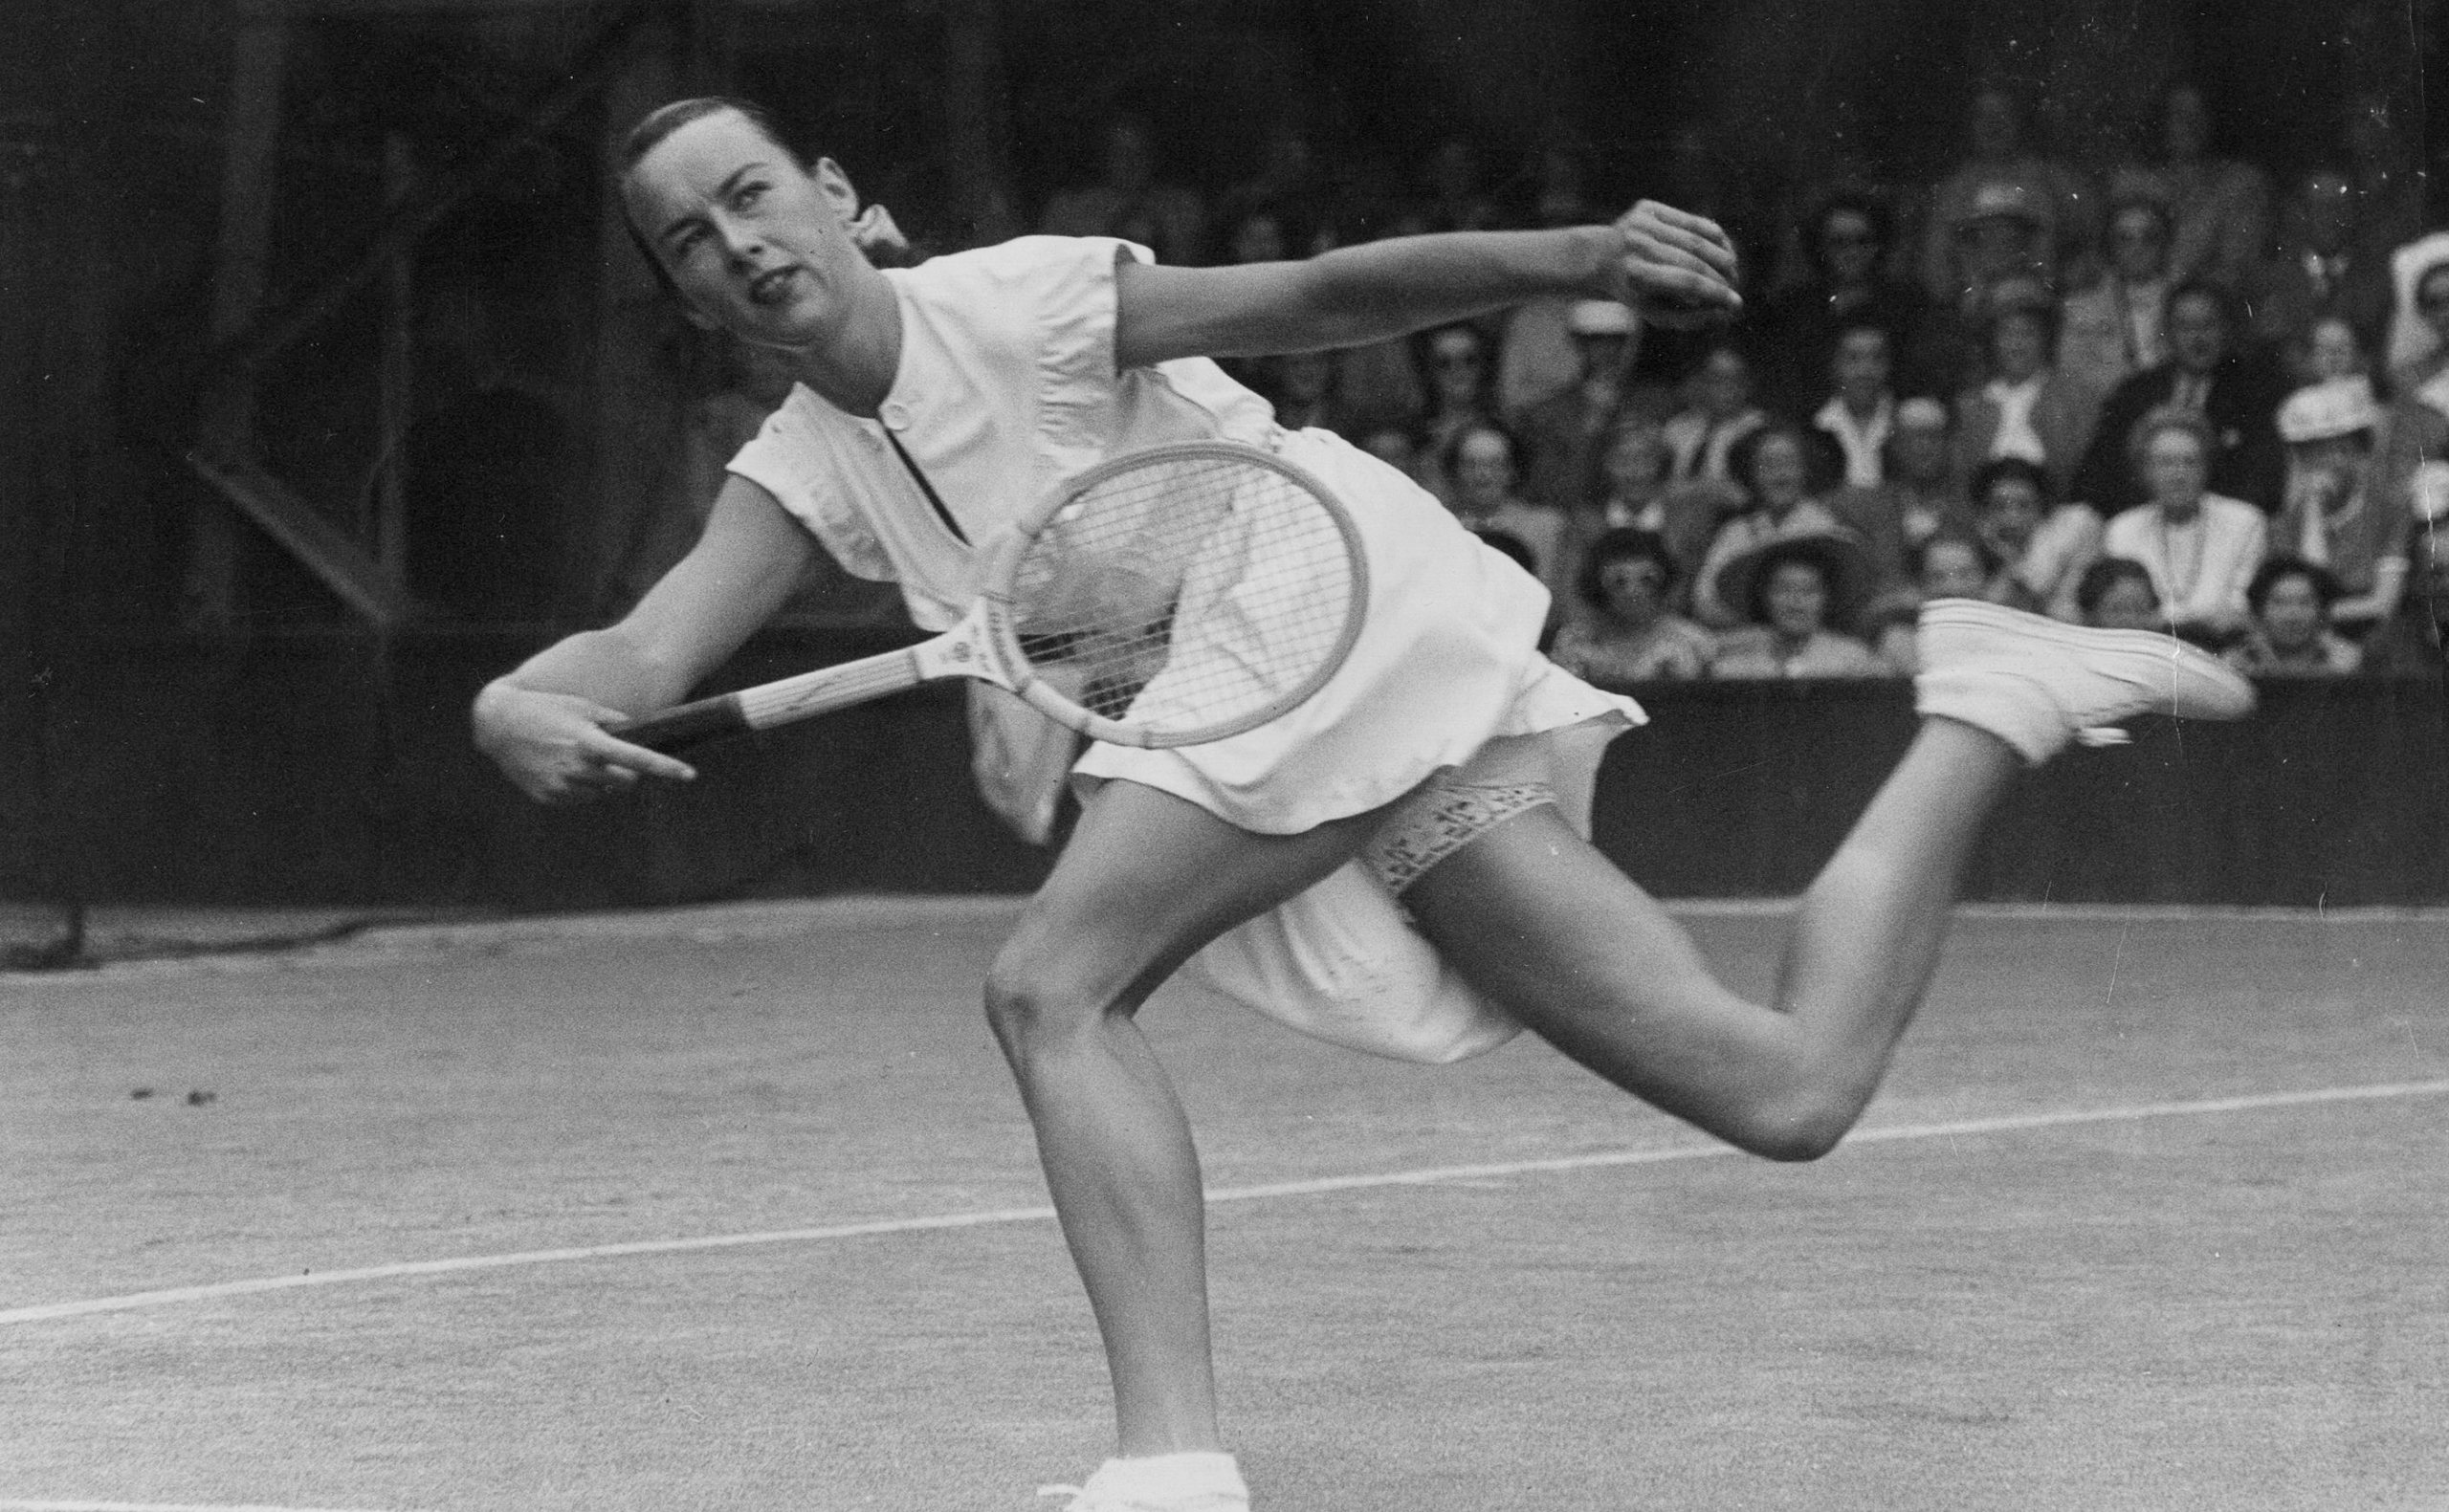 American tennis player Gertrude Moran, or Gorgeous Gussie, on her way to beating F M Wilford at Wimbledon in 1949